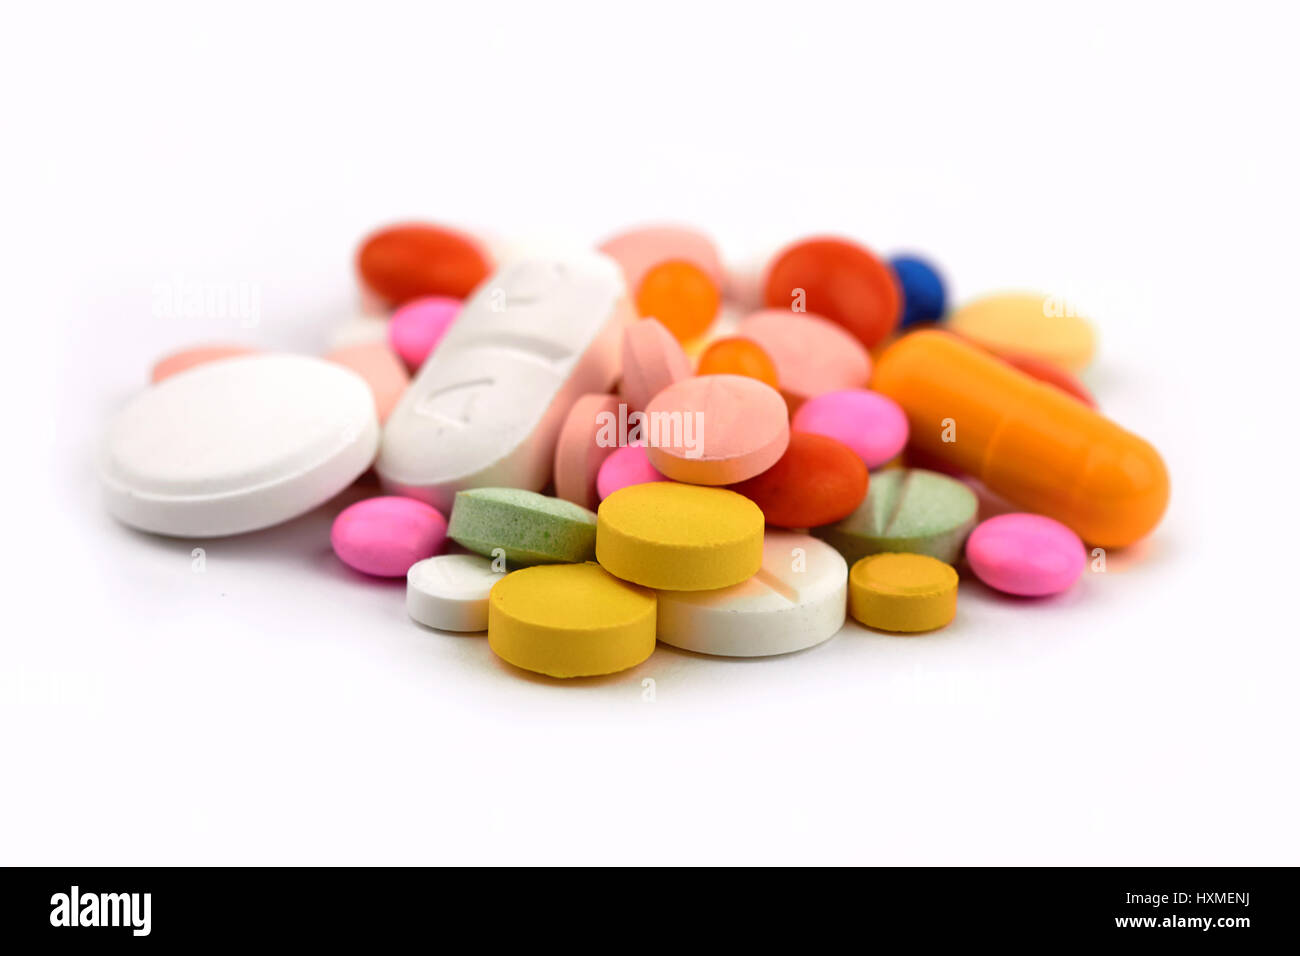 vitamins, pills and tablets on a white background Stock Photo